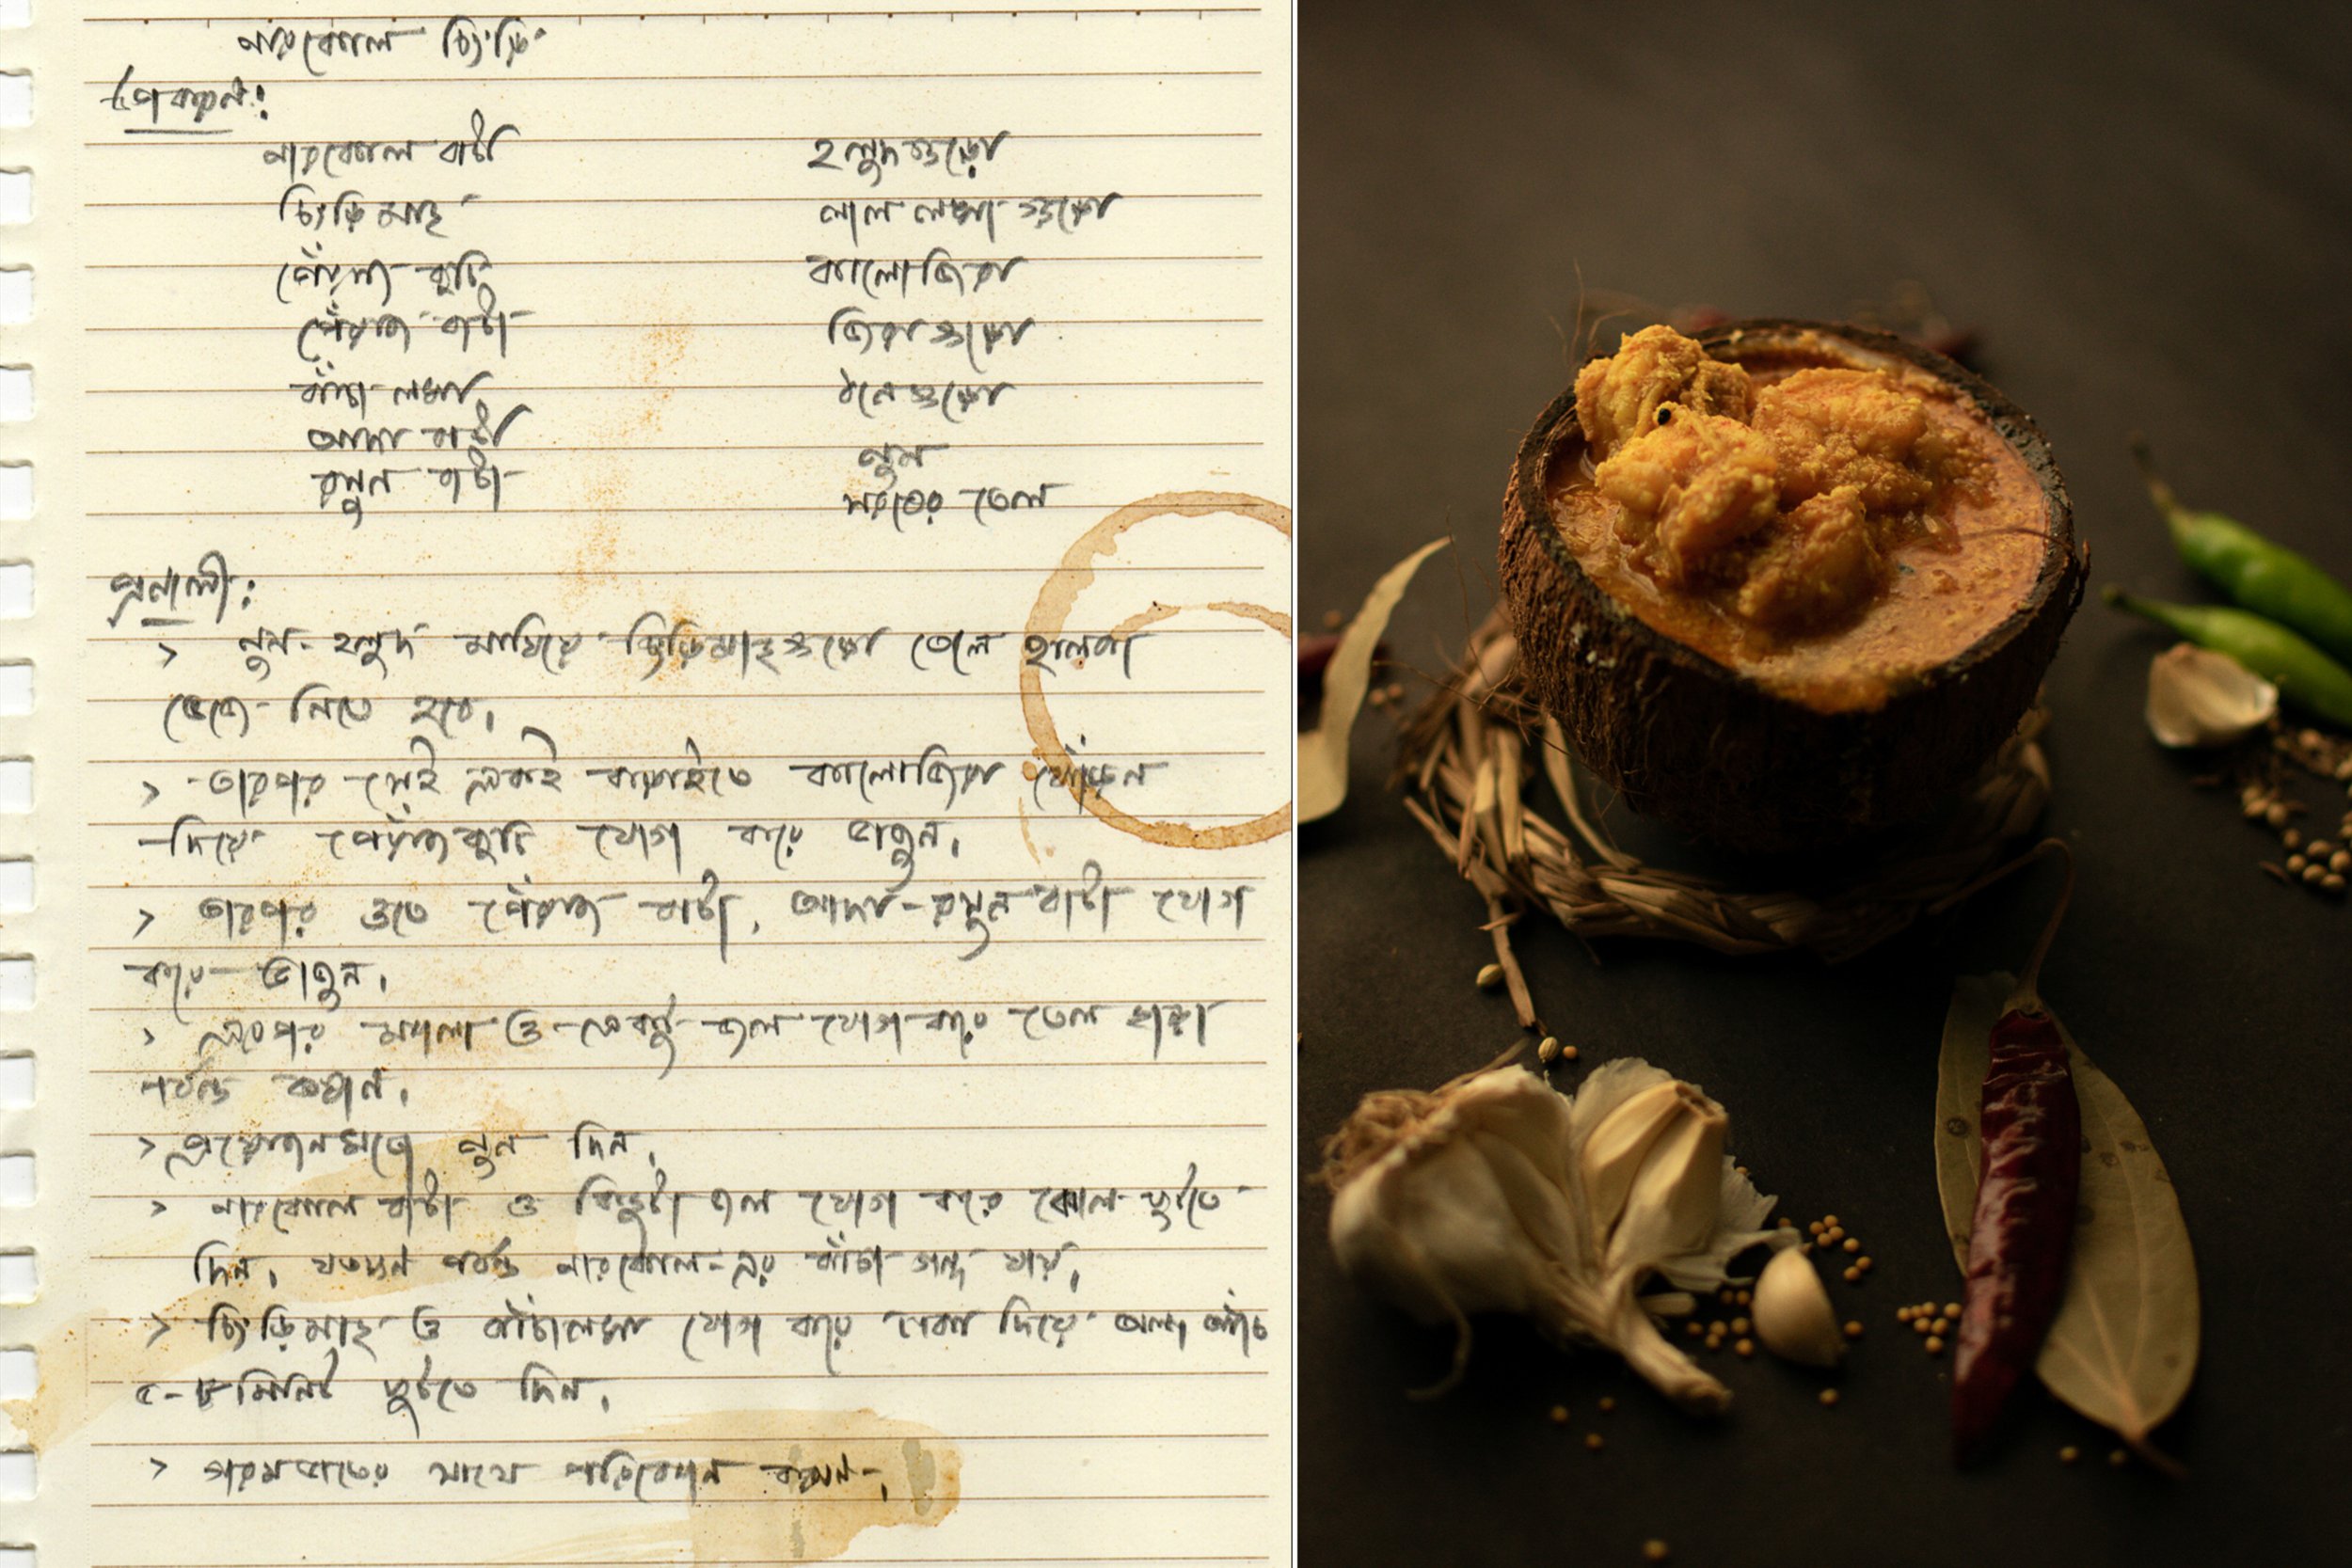  ‘Narkel Chingri’ is a famous dish from Barishal and my father has grown up relishing it. Baba recollects how he had secretly sneaked in some pickle and how the help-maid had packed some rice and Narkel Chingri for the journey. When I cooked it at ho